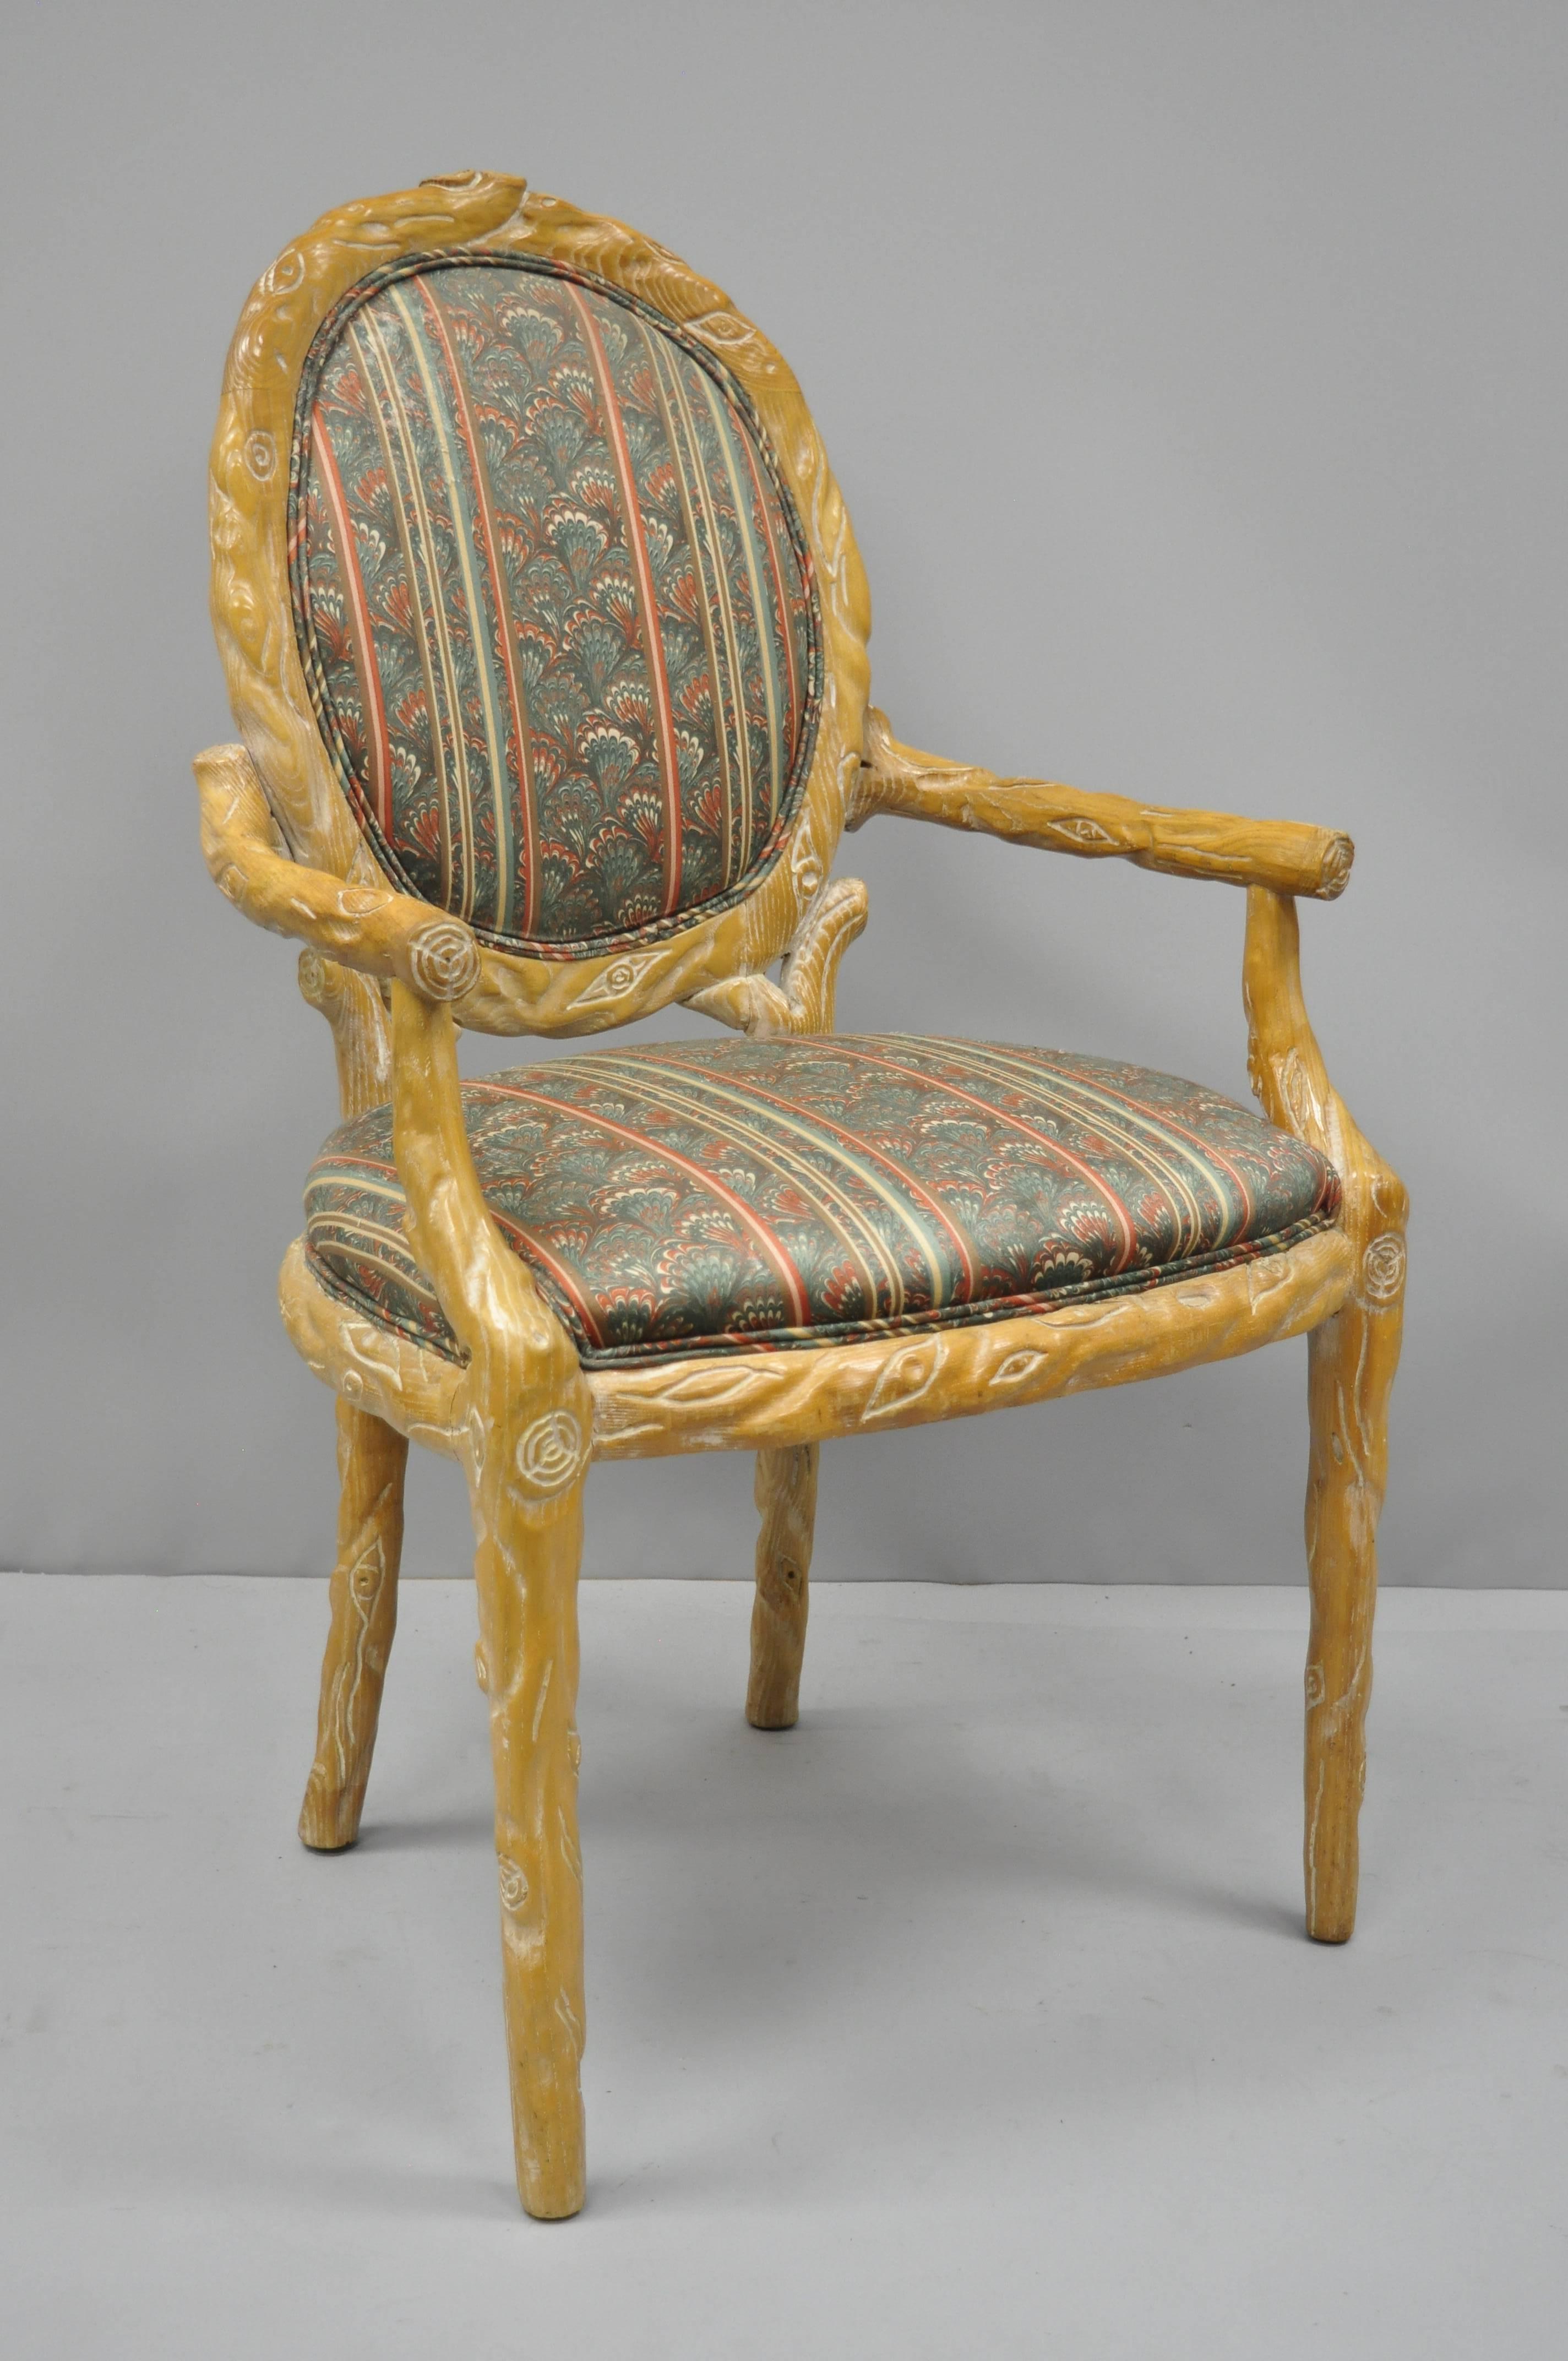 Faux bois rush seat dining side chair. Item features solid wood construction, nicely carved details, tapered legs, blue colored fabric cushion and quality American craftsmanship. Mid-late 20th century. Measurements: 39.5